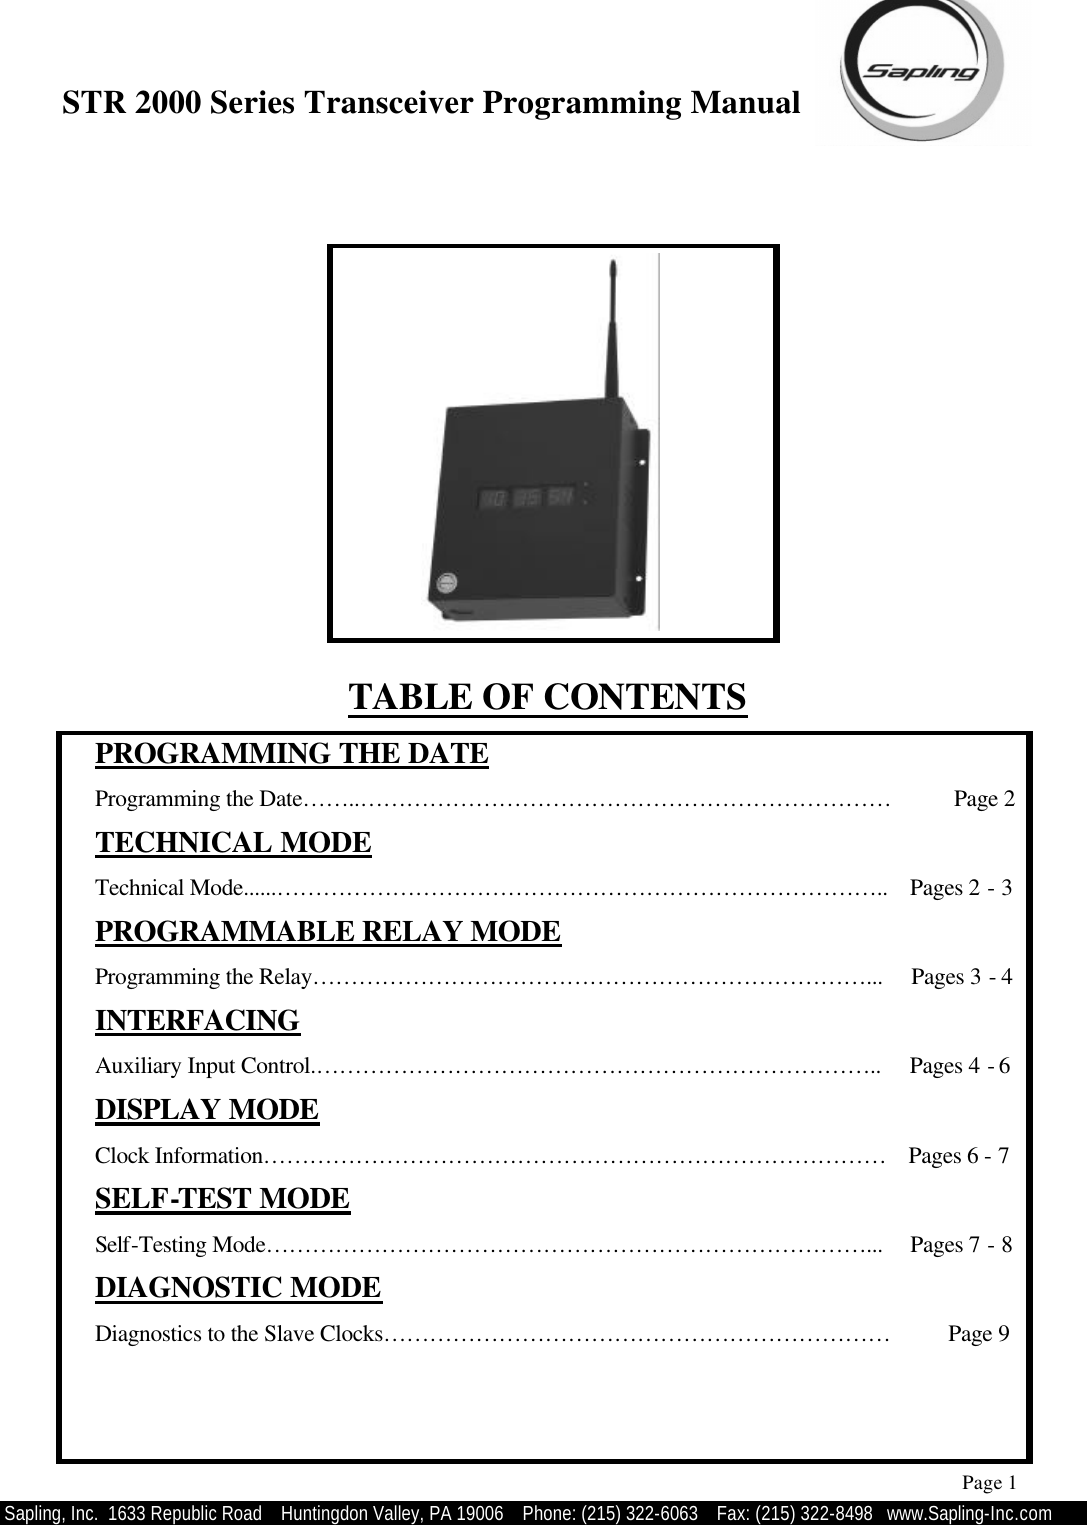 STR 2000 Series Transceiver Programming Manual  Sapling, Inc.  1633 Republic Road    Huntingdon Valley, PA 19006    Phone: (215) 322-6063   Fax: (215) 322-8498   www.Sapling-Inc.com TABLE OF CONTENTS  PROGRAMMING THE DATE  Programming the Date……..……………………………………………………………           Page 2  TECHNICAL MODE  Technical Mode......……………………………………………………………………..    Pages 2 - 3  PROGRAMMABLE RELAY MODE  Programming the Relay………………………………………………………………...     Pages 3 - 4  INTERFACING  Auxiliary Input Control.………………………………………………………………..     Pages 4 - 6   DISPLAY MODE  Clock Information………………………………………………………………………    Pages 6 - 7  SELF-TEST MODE  Self-Testing Mode……………………………………………………………………...     Pages 7 - 8  DIAGNOSTIC MODE  Diagnostics to the Slave Clocks…………………………………………………………          Page 9       Page 1 